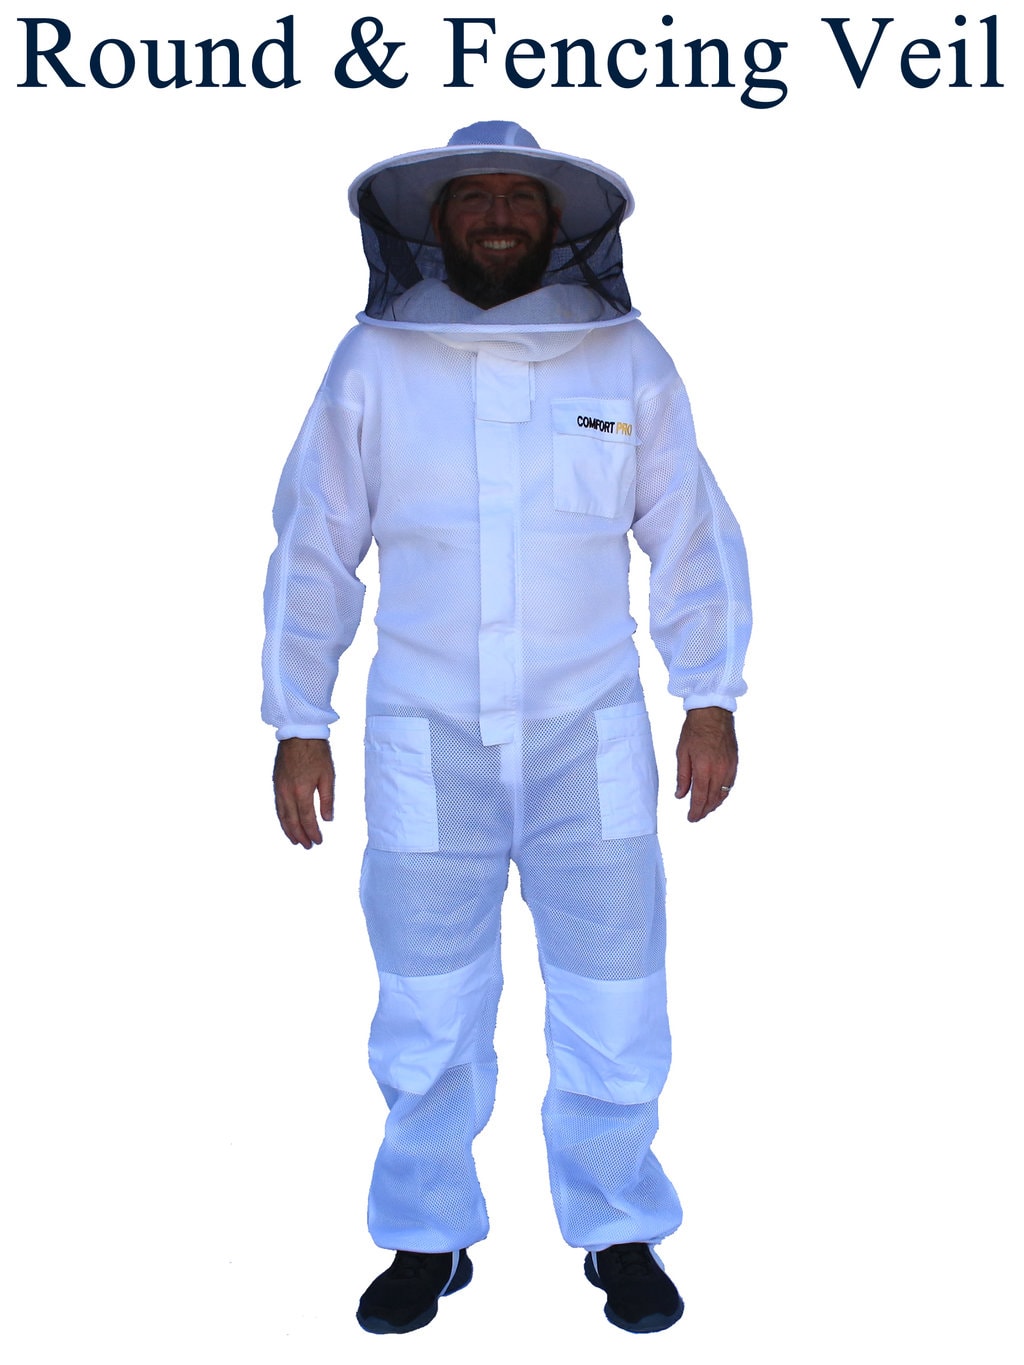 Ventilated Bee Suit with Round Veil and Fencing Veil – Full Suit